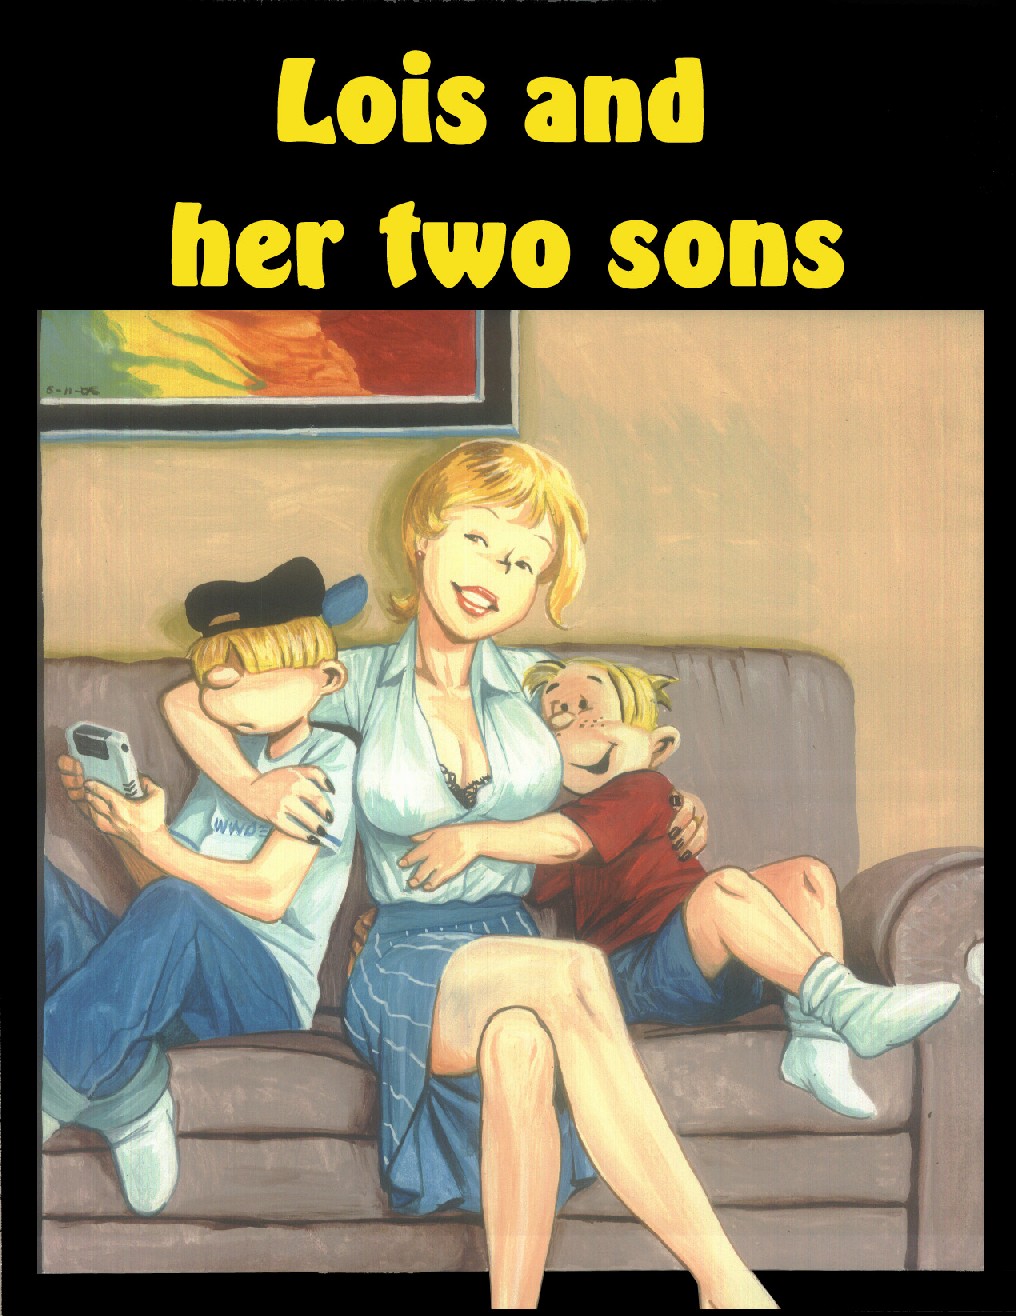 Pandora Box - Lois and her two sons